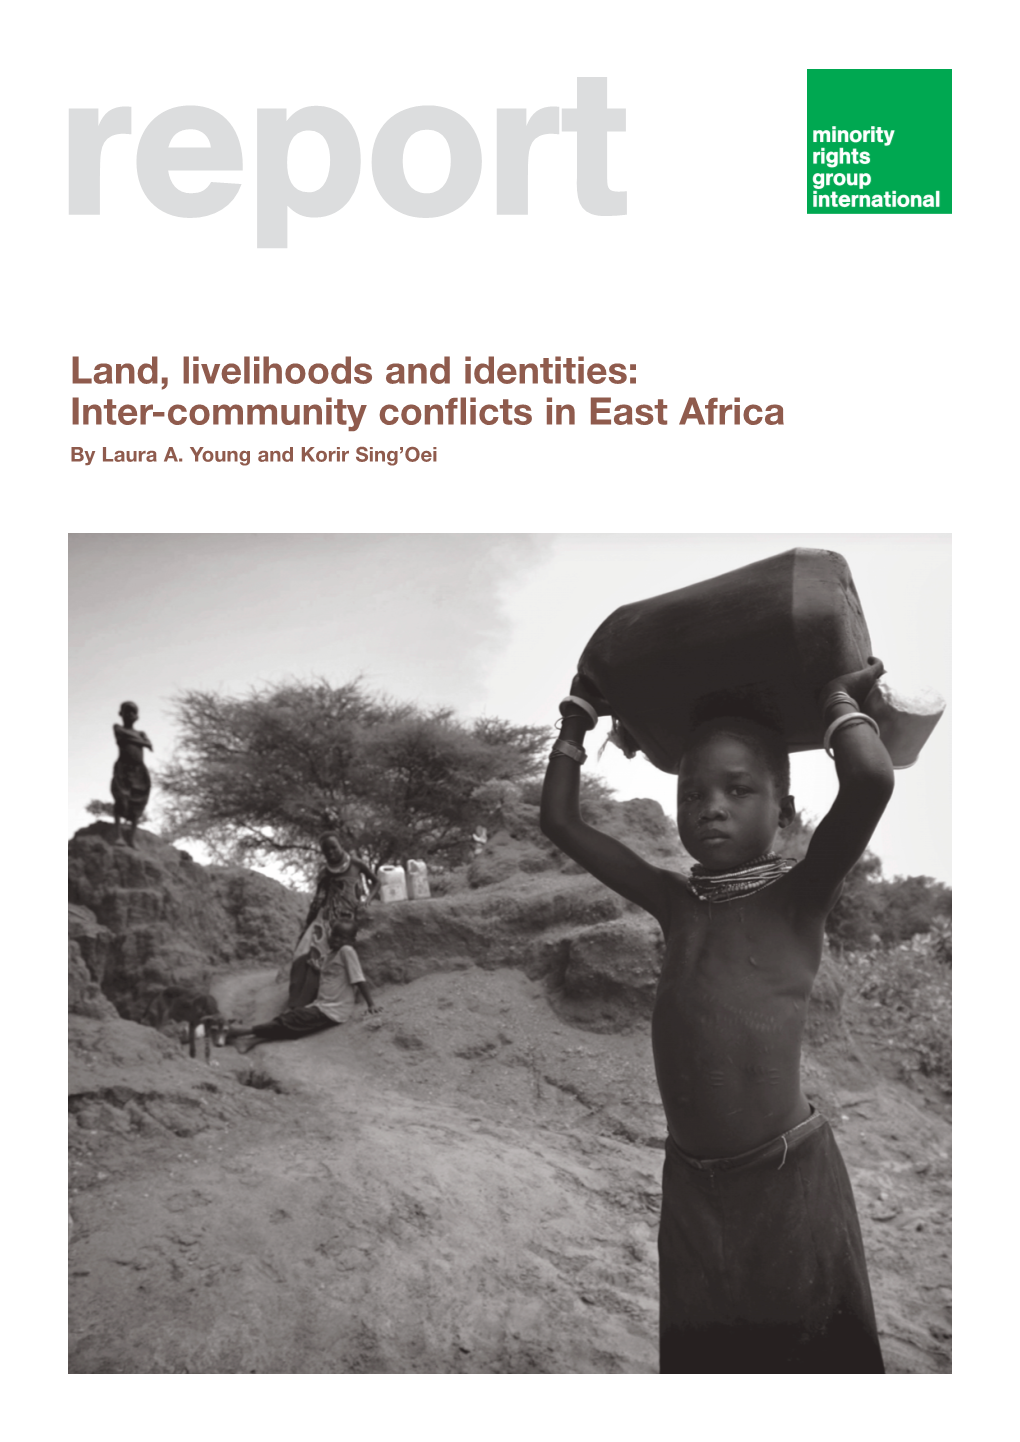 INTER-COMMUNITY CONFLICTS in EAST AFRICA Uganda, Kenya and South Sudan